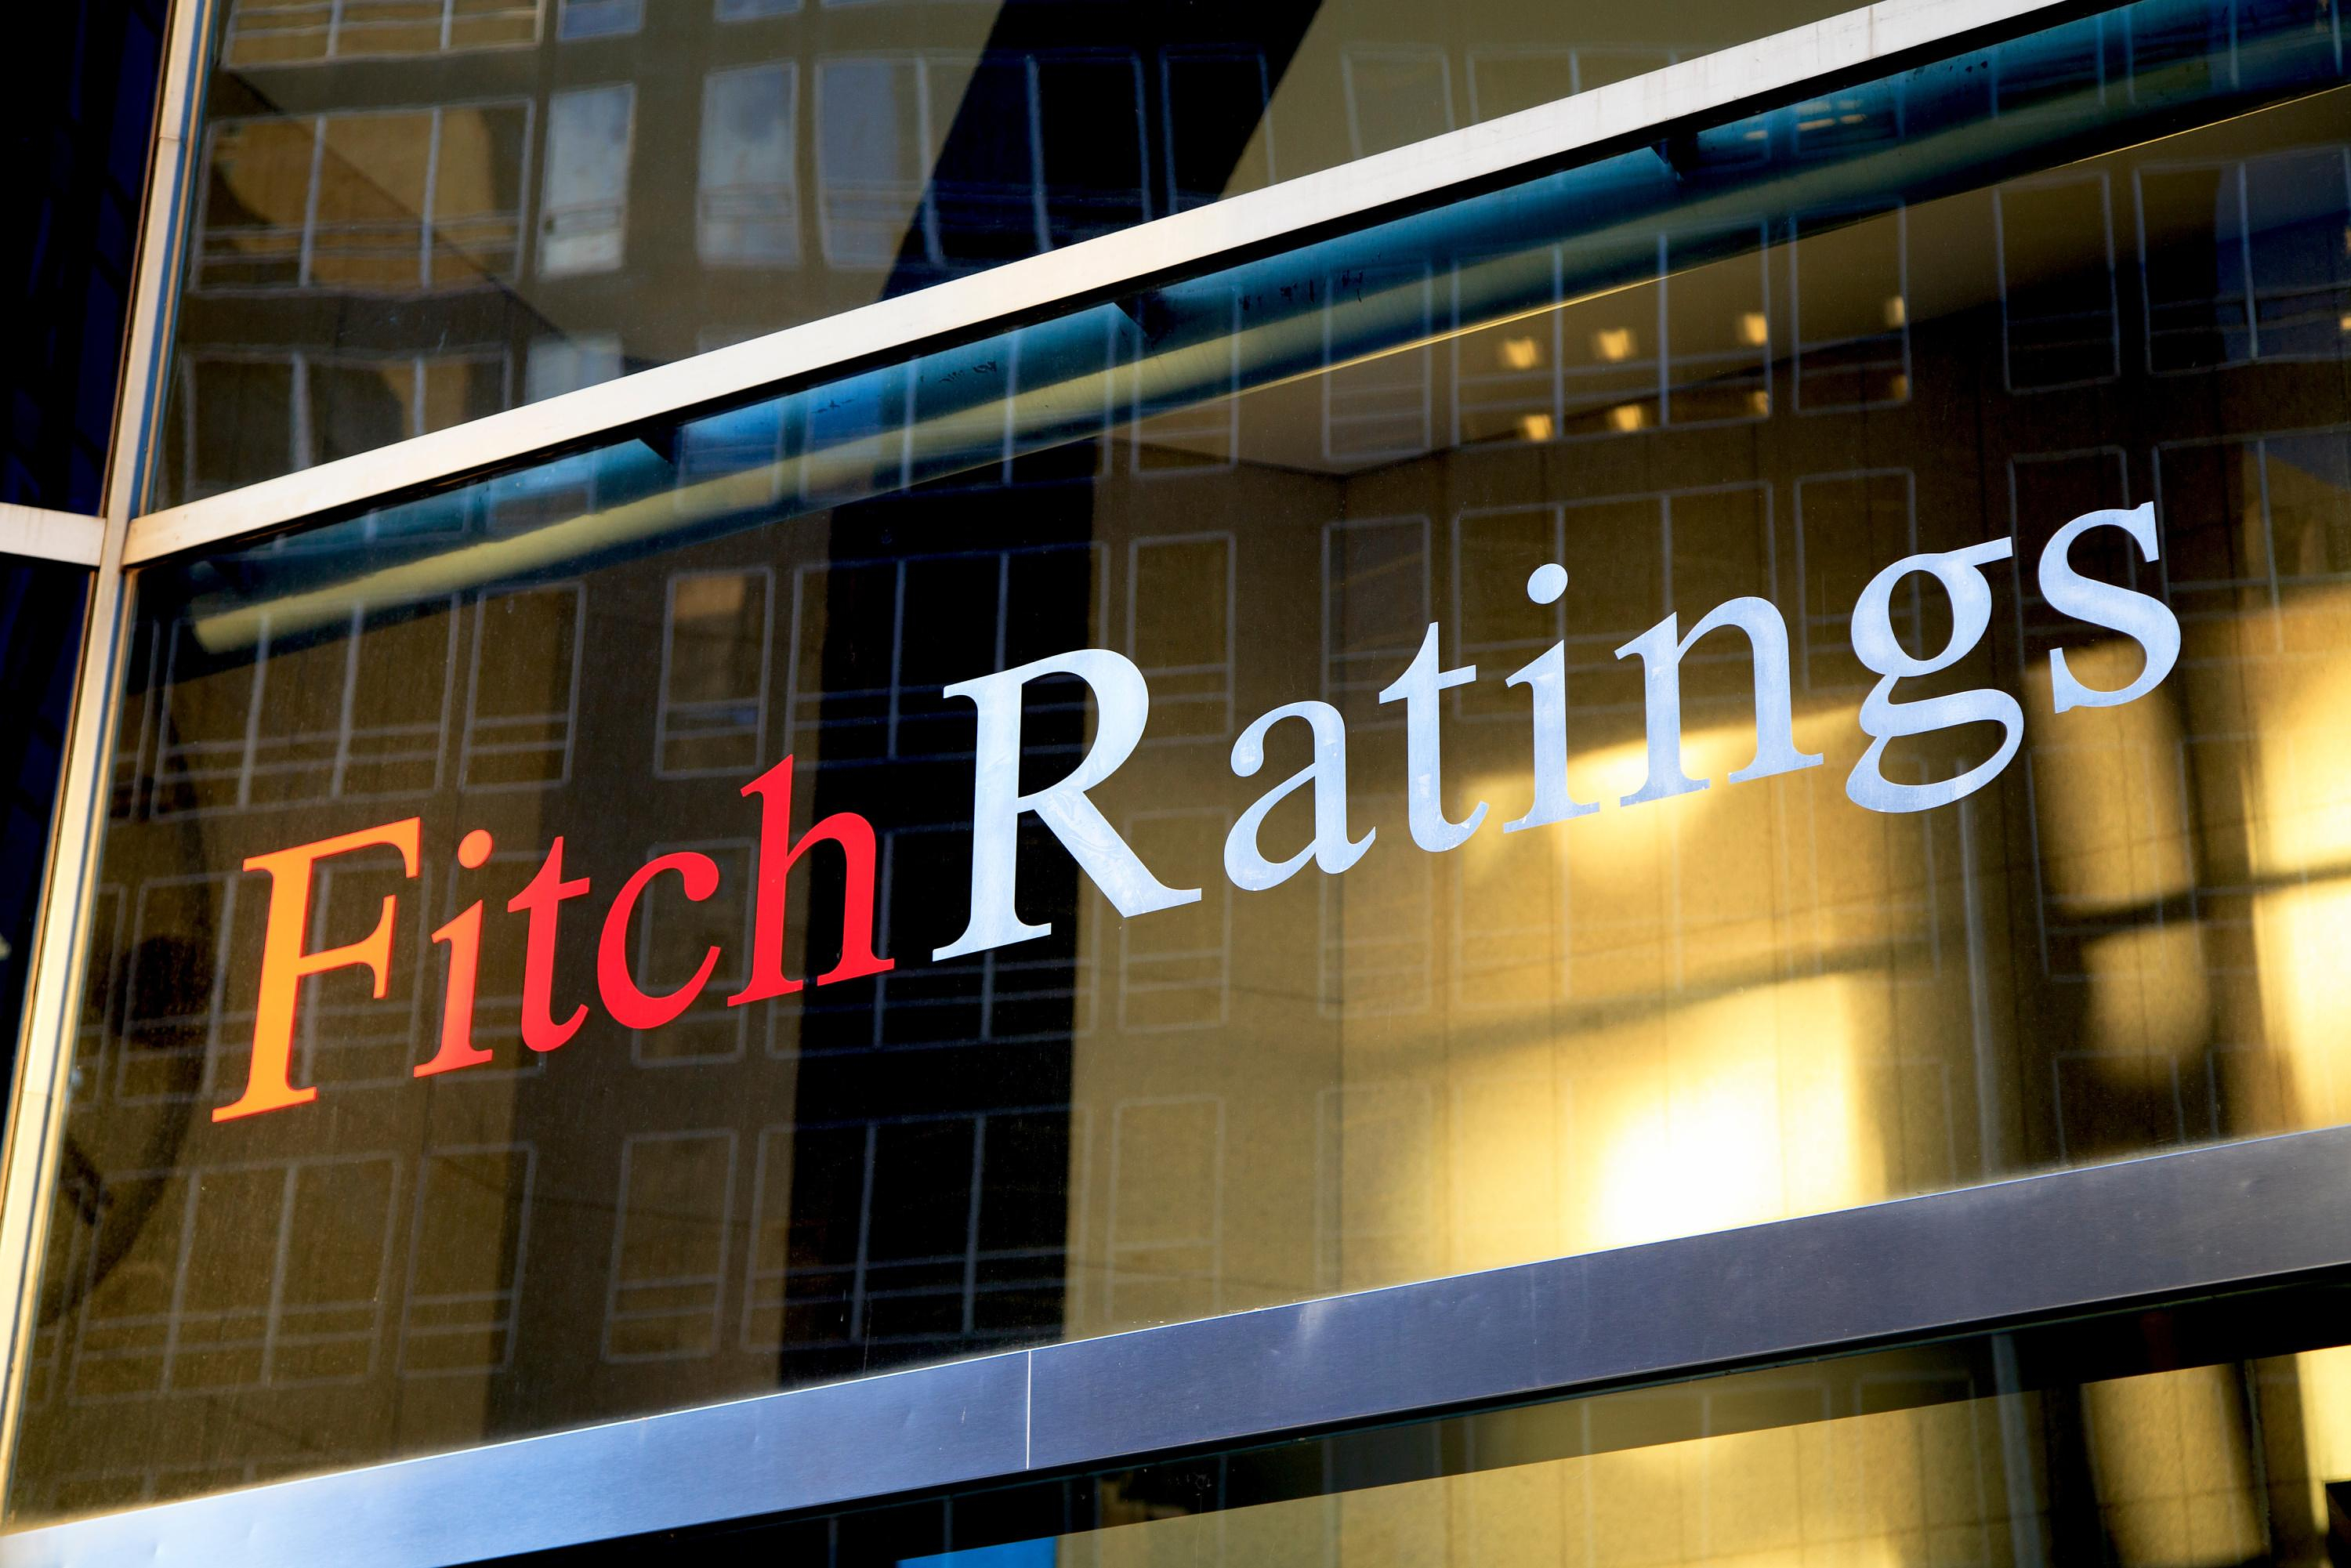 China: Fitch agency downgrades credit outlook, Beijing considers this decision “regrettable”